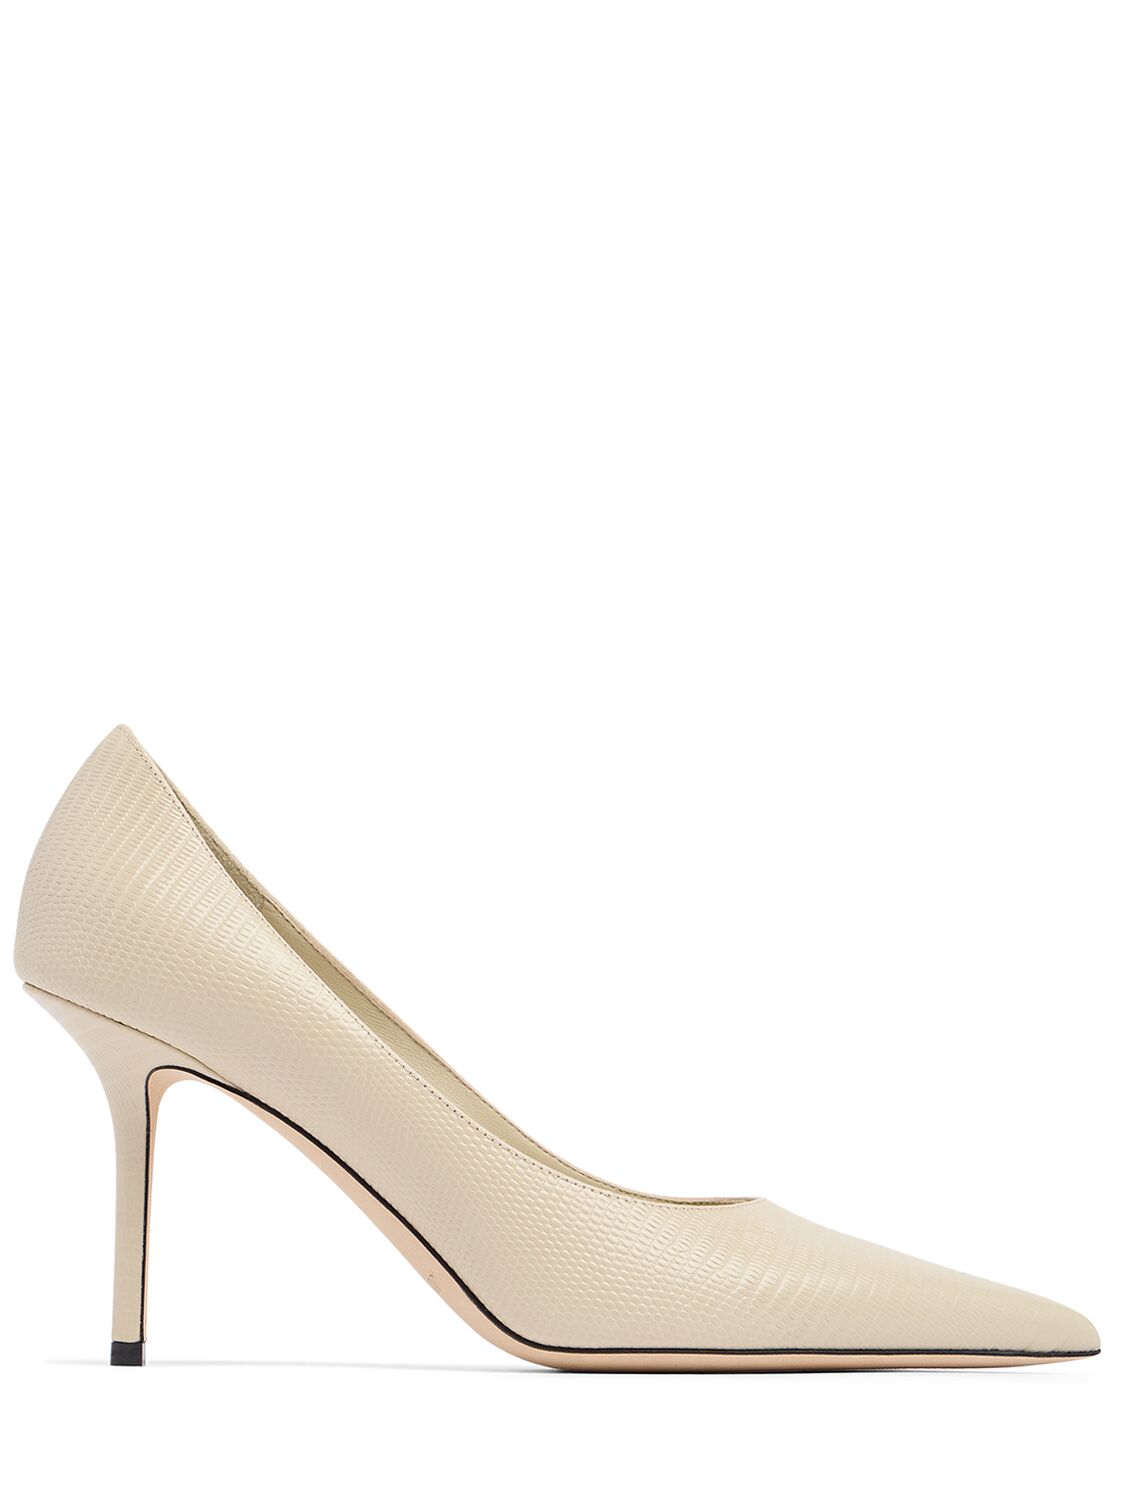 Jimmy Choo 85mm Love Lizard Printed Leather Pumps In Off White